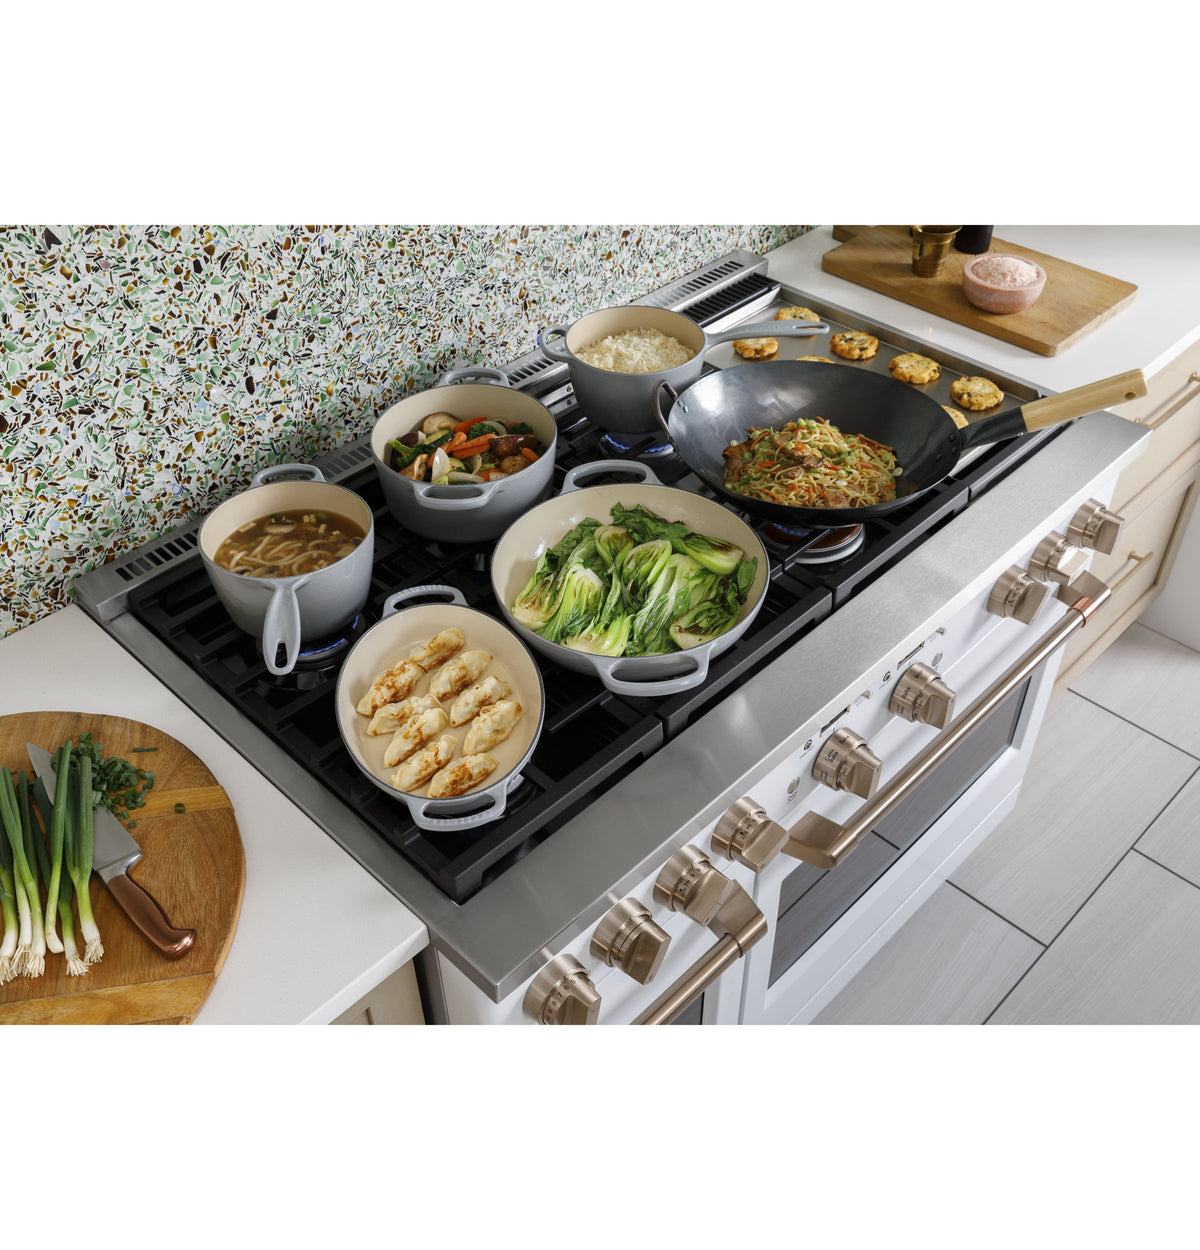 https://www.geaprstore.shop/wp-content/uploads/1690/17/save-big-on-cafe-48-smart-dual-fuel-commercial-style-range-with-6-burners-and-griddle-natural-gas-ge-appliances-pr-online-store-the-best-products-are-available-at-the-most-affordable-pri_7.jpg